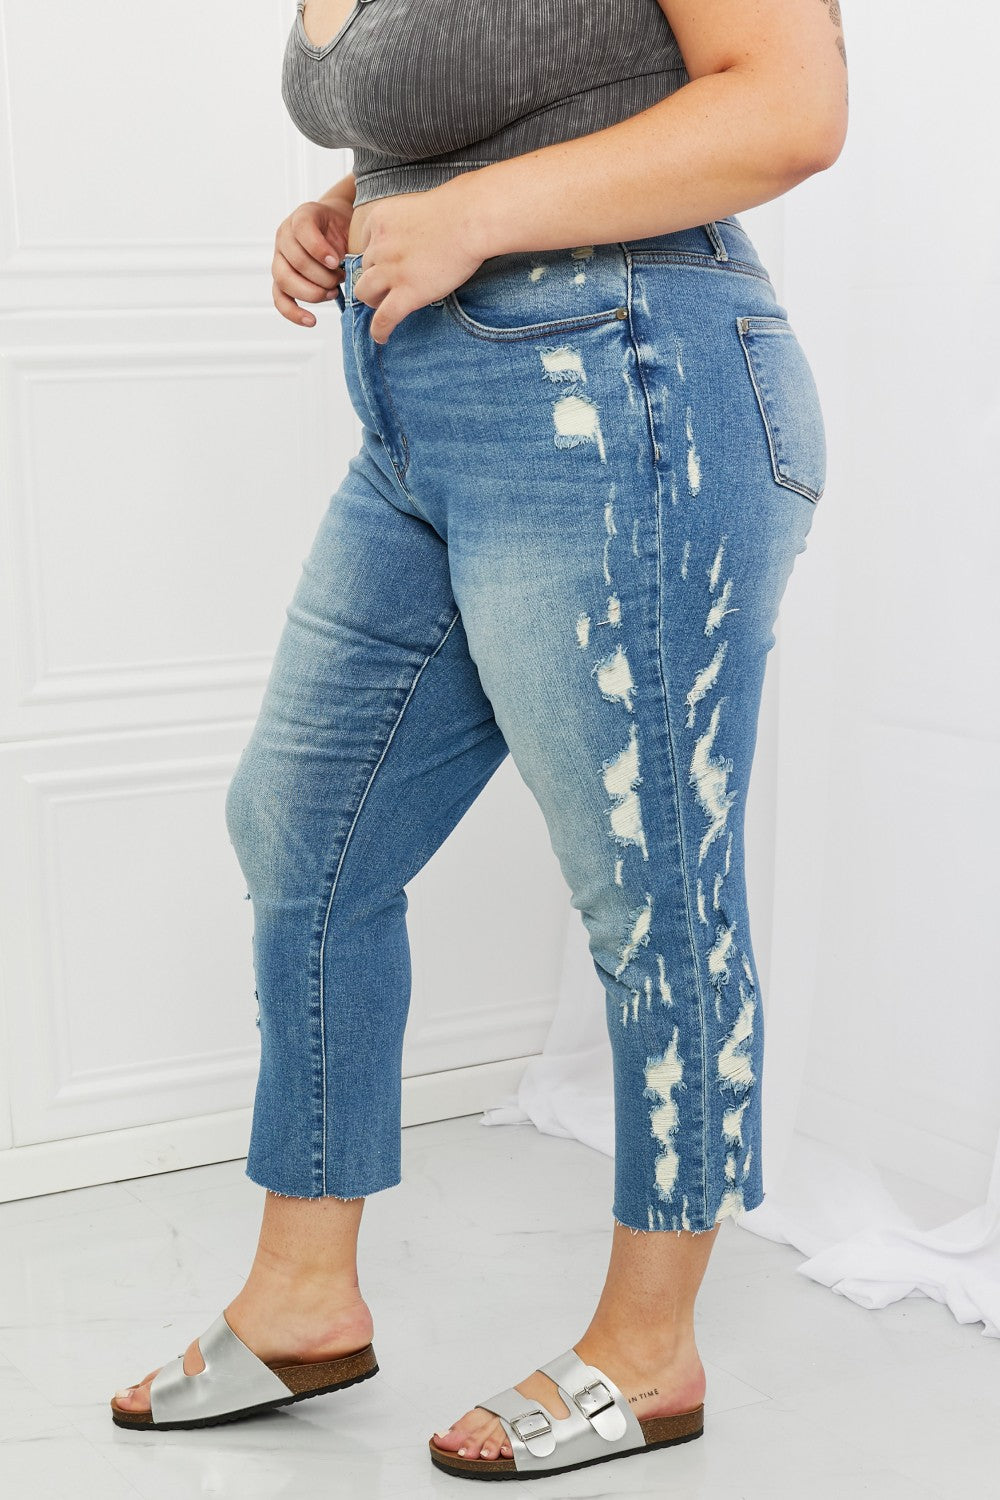 Judy Blue Straight Leg Distressed Jeans - AnnRose Boutique